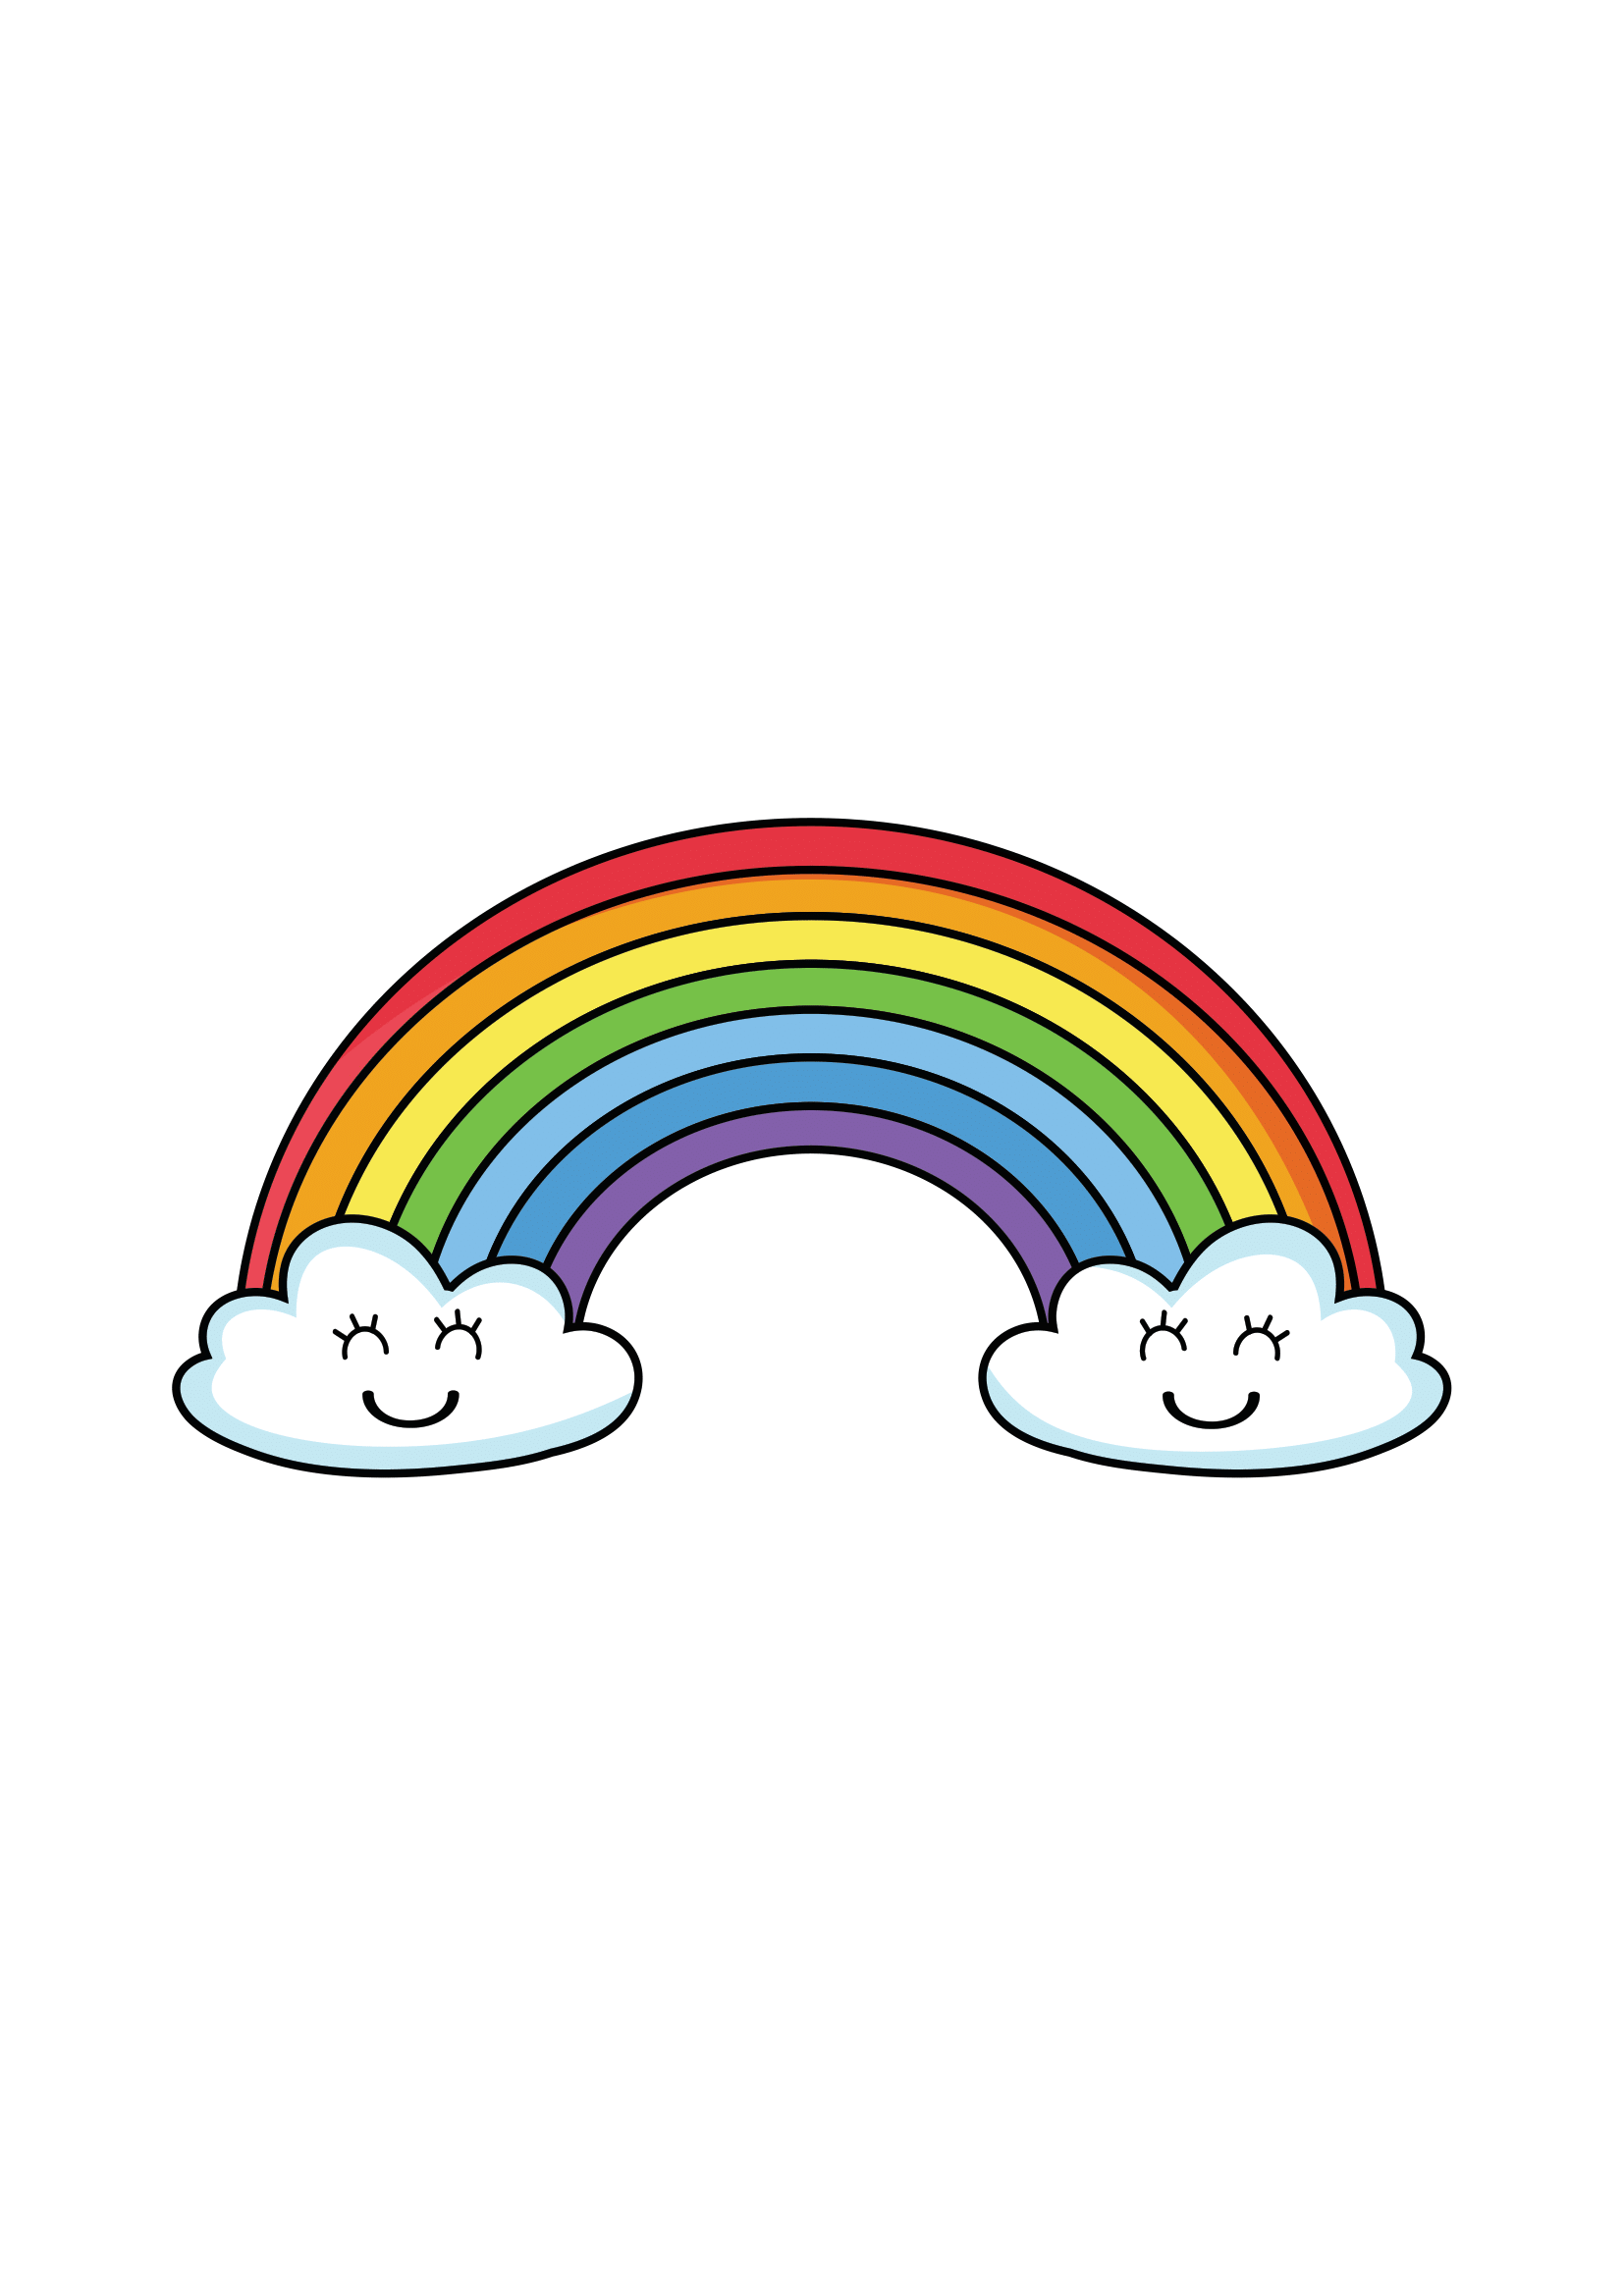 How to Draw A Rainbow Step by Step Printable